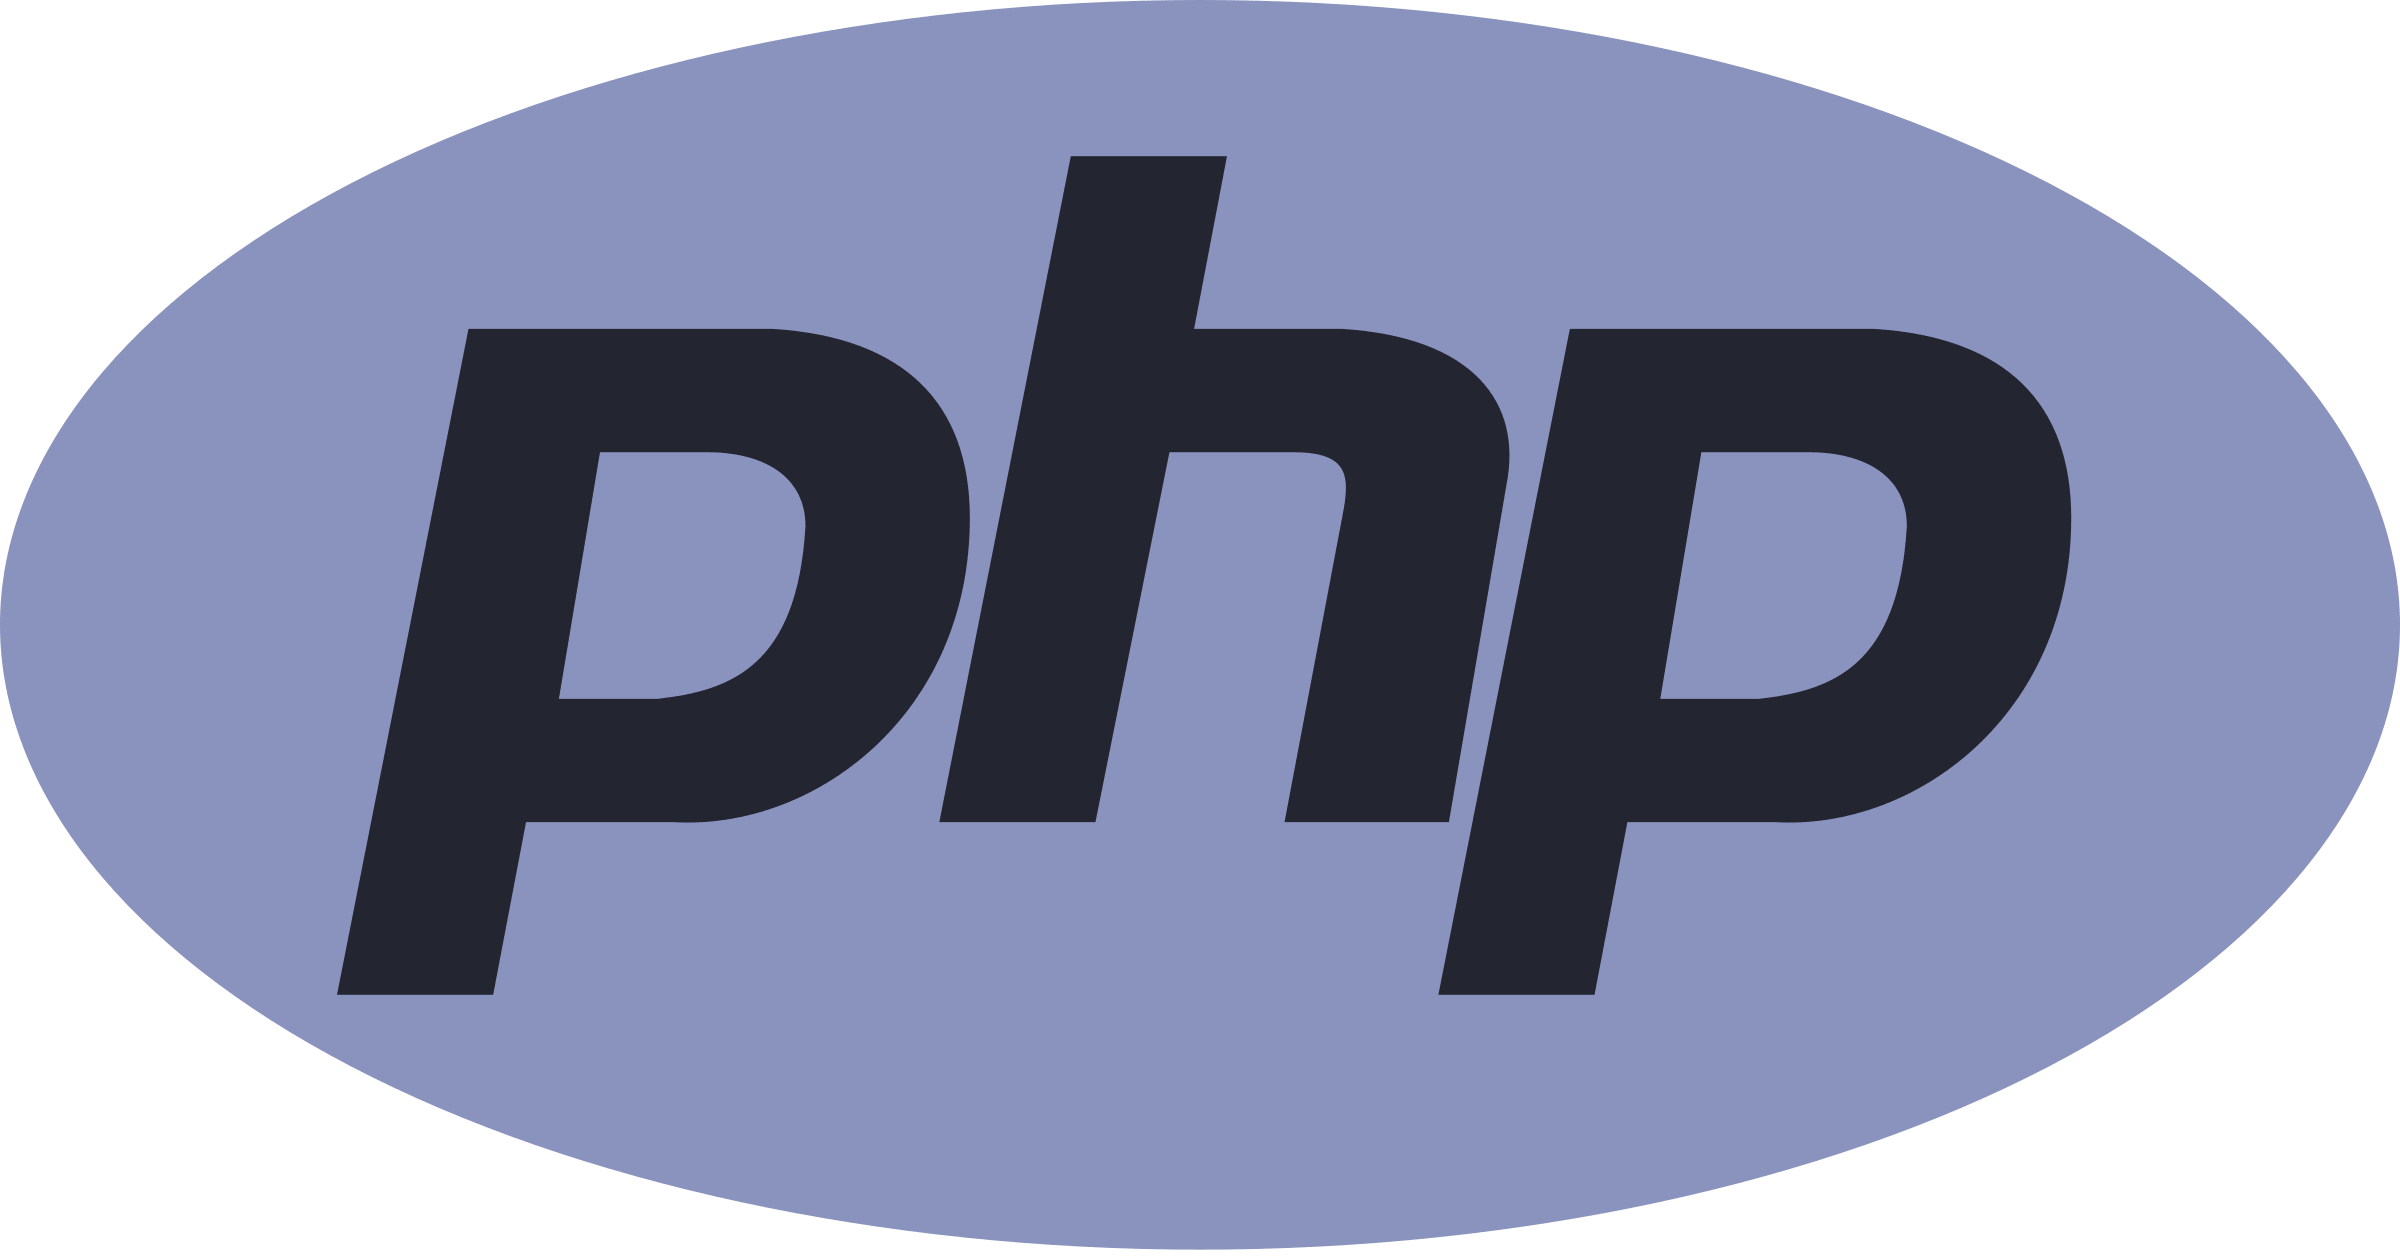 php website dc networks